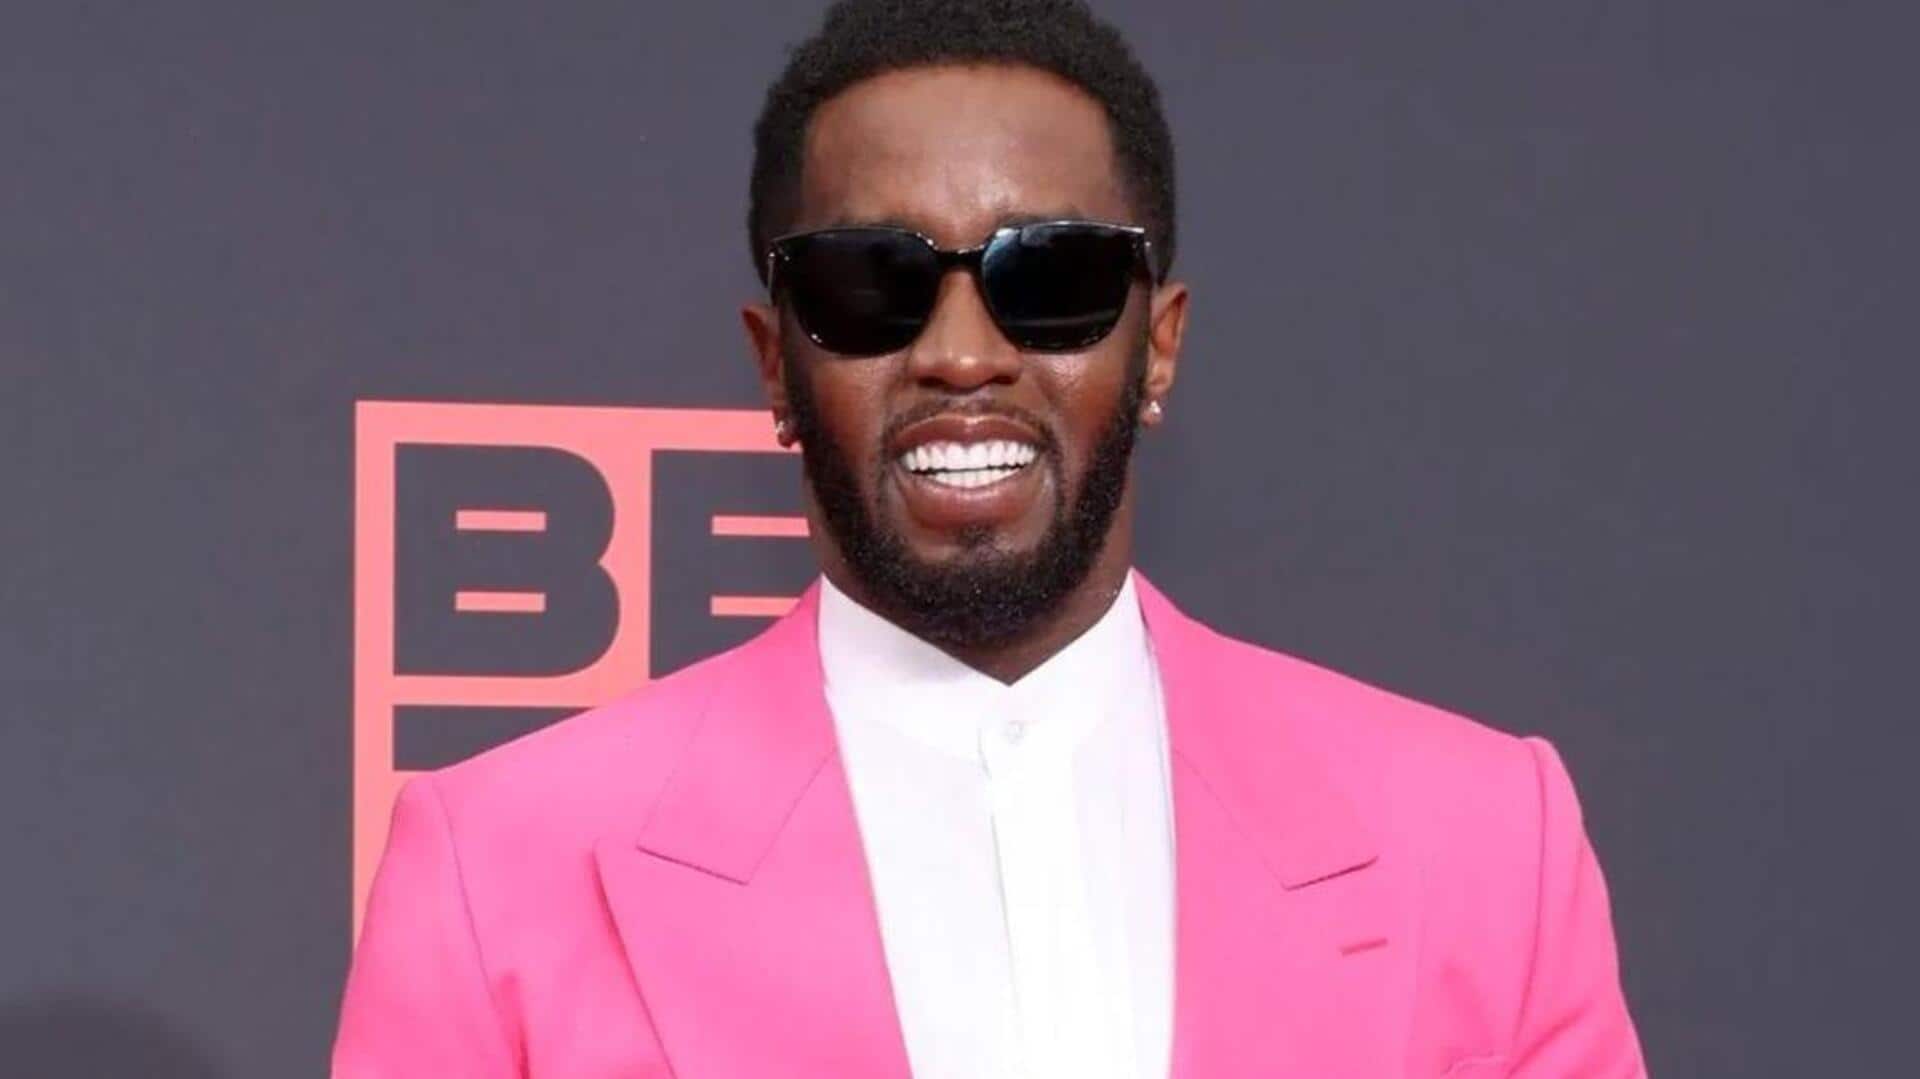 Sex trafficking probe: Properties of rapper Sean 'Diddy' Combs searched